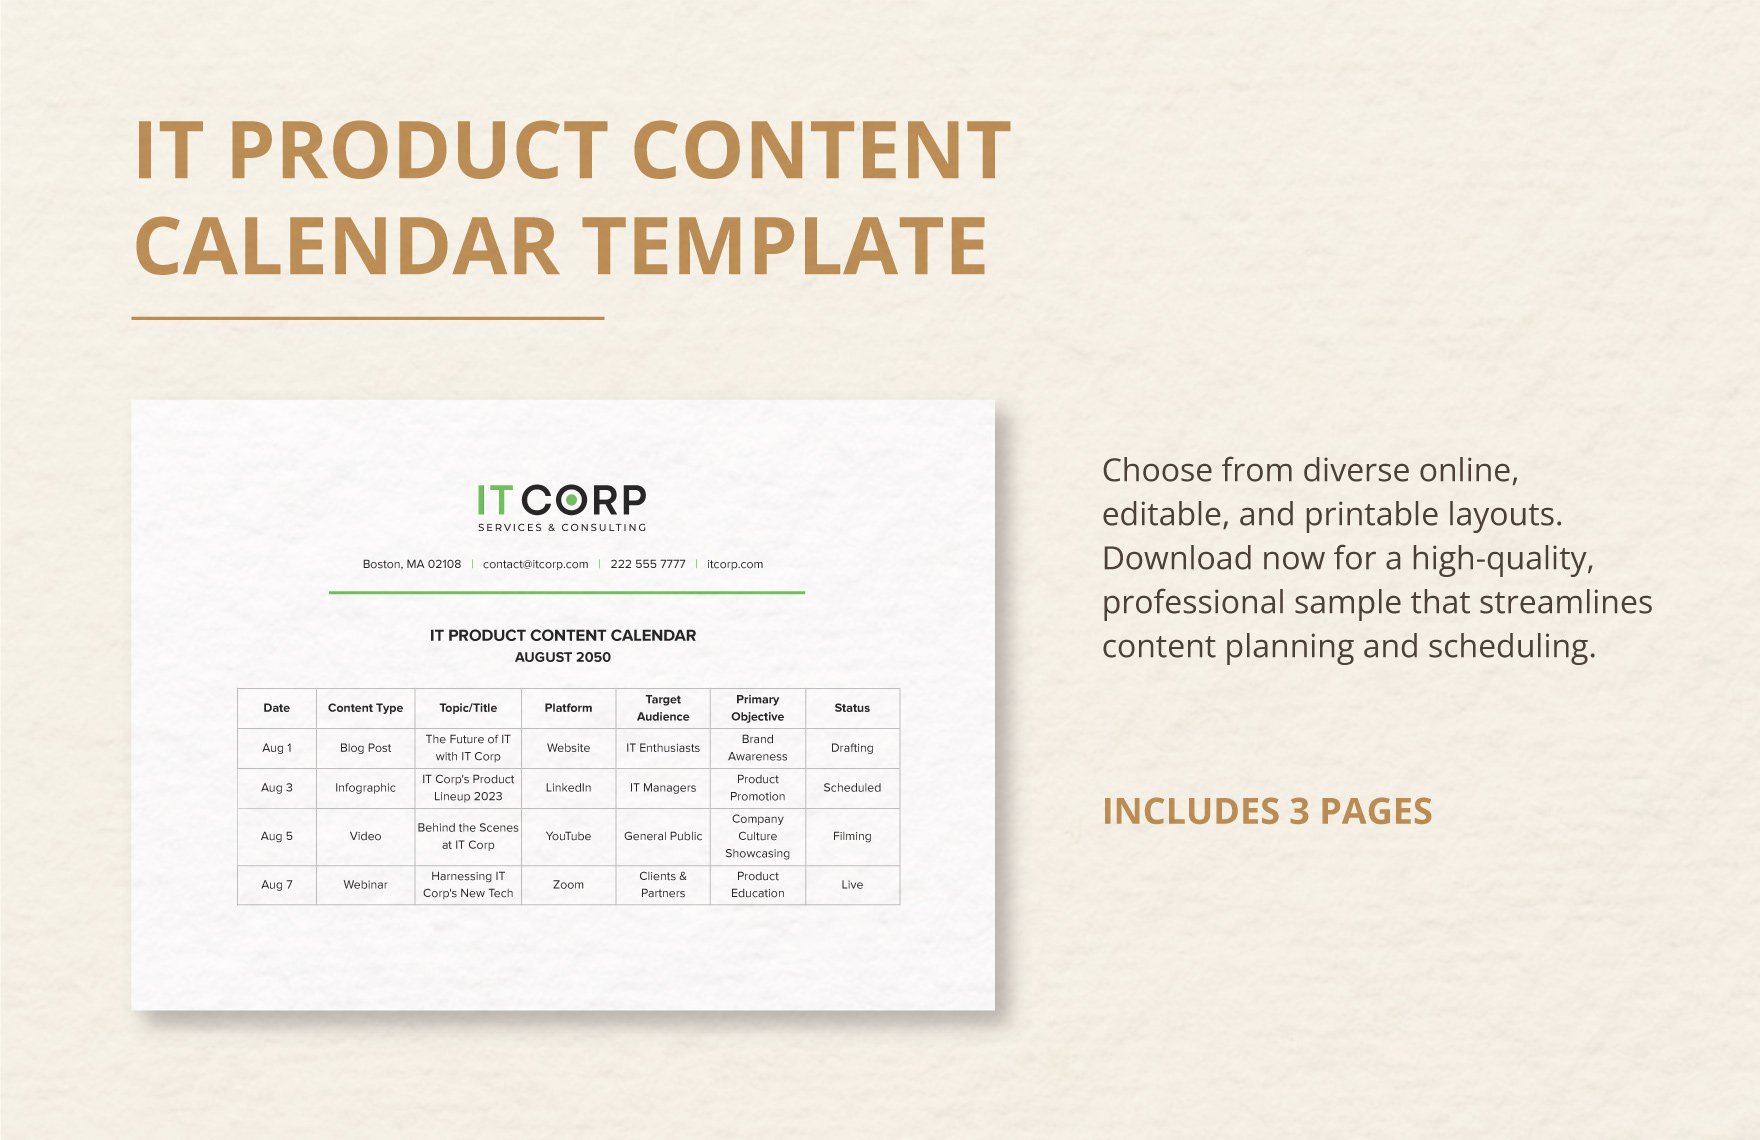 IT Product Content Calendar Template in Word, Google Docs, PDF